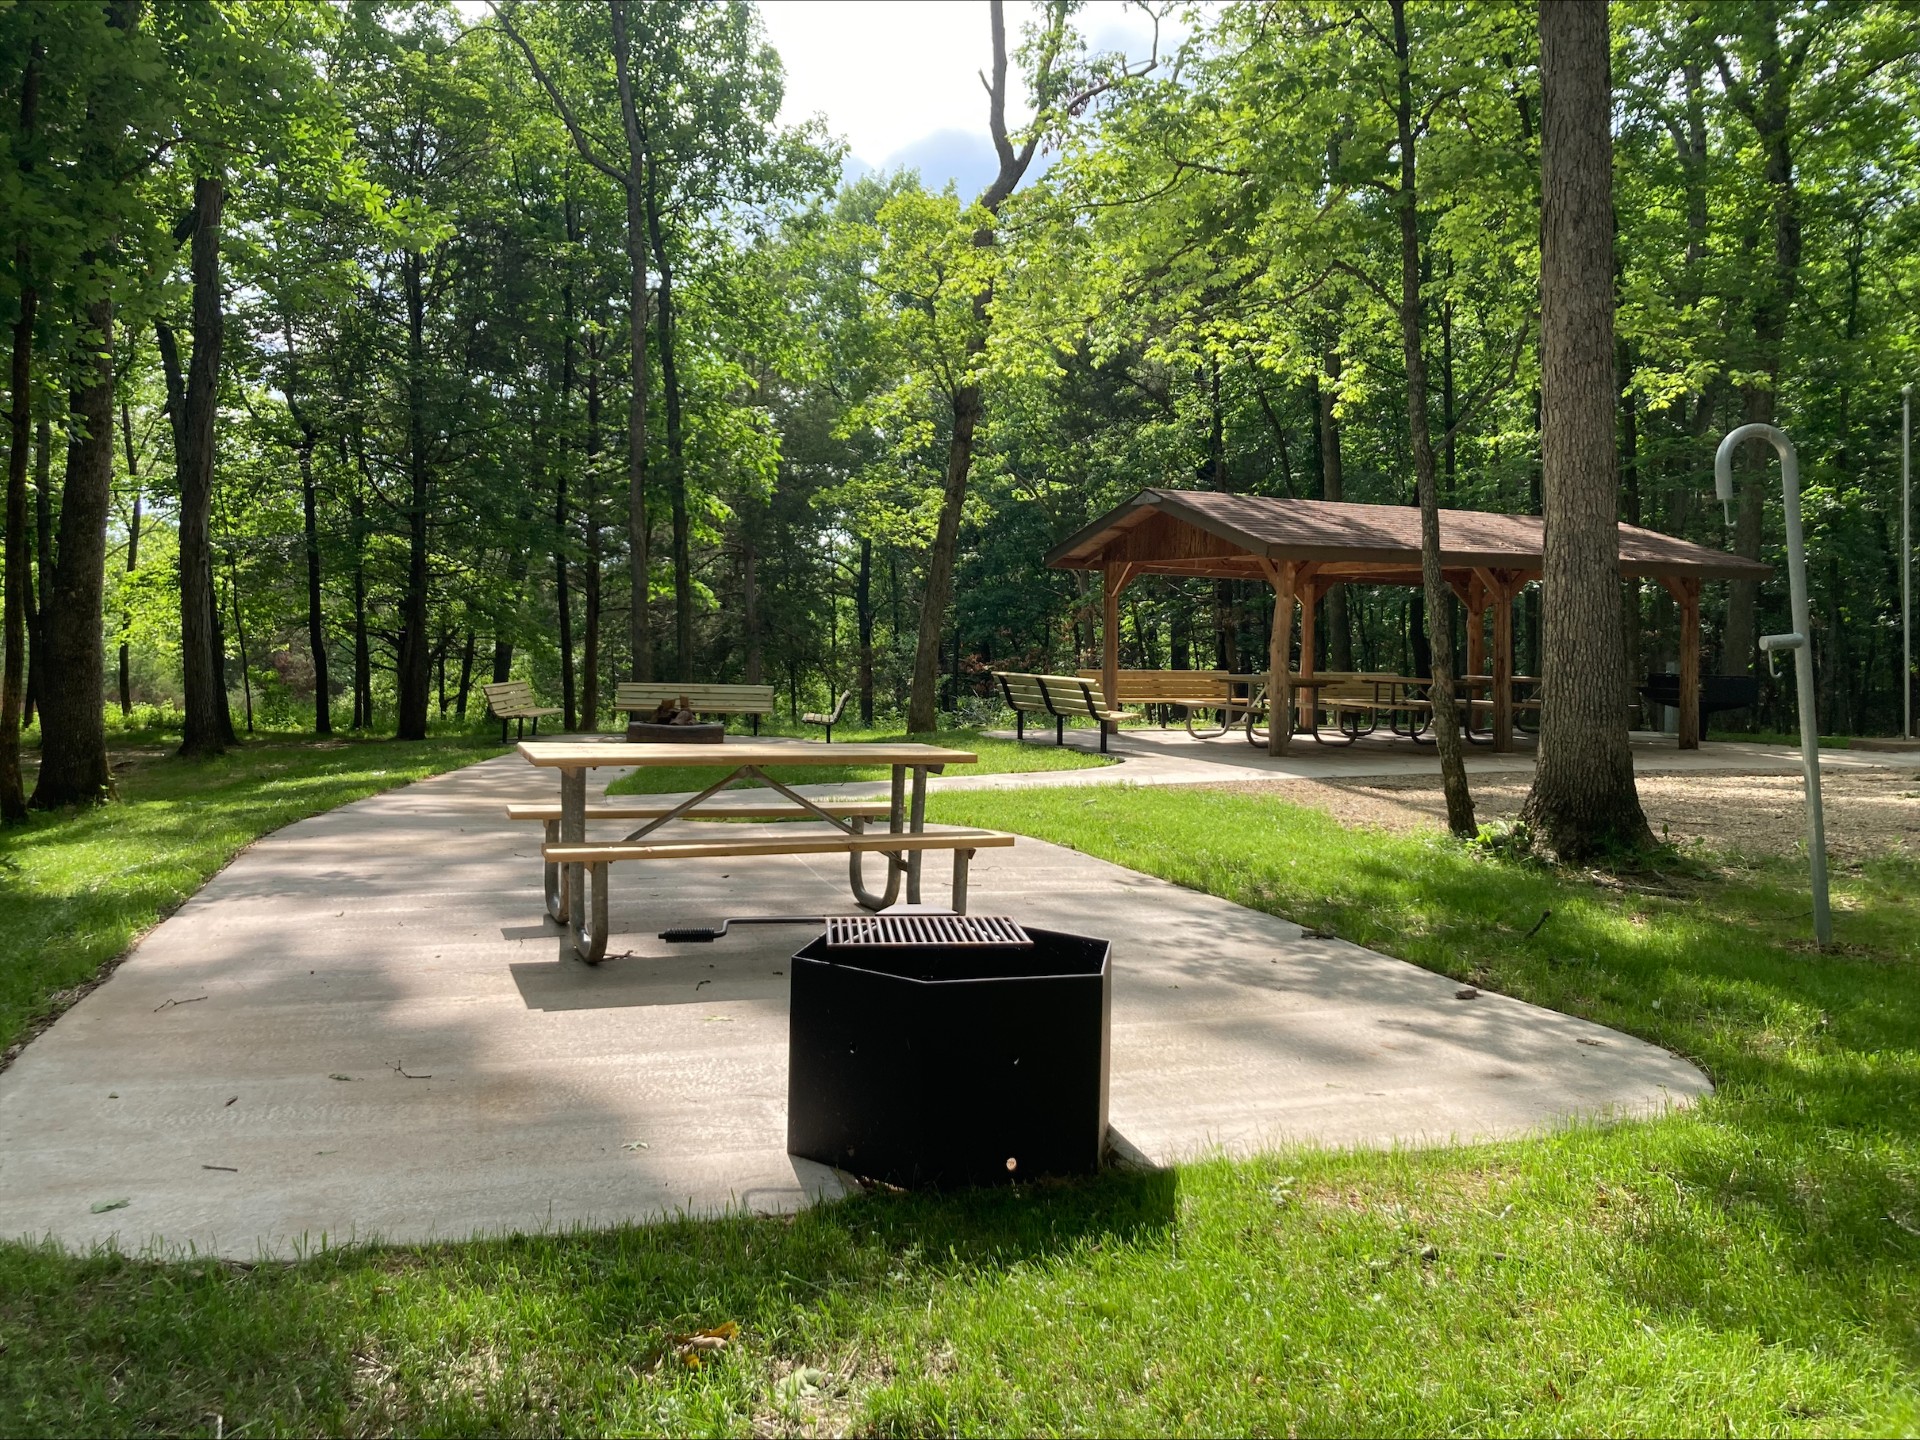 Picnic tables and covered meeting area